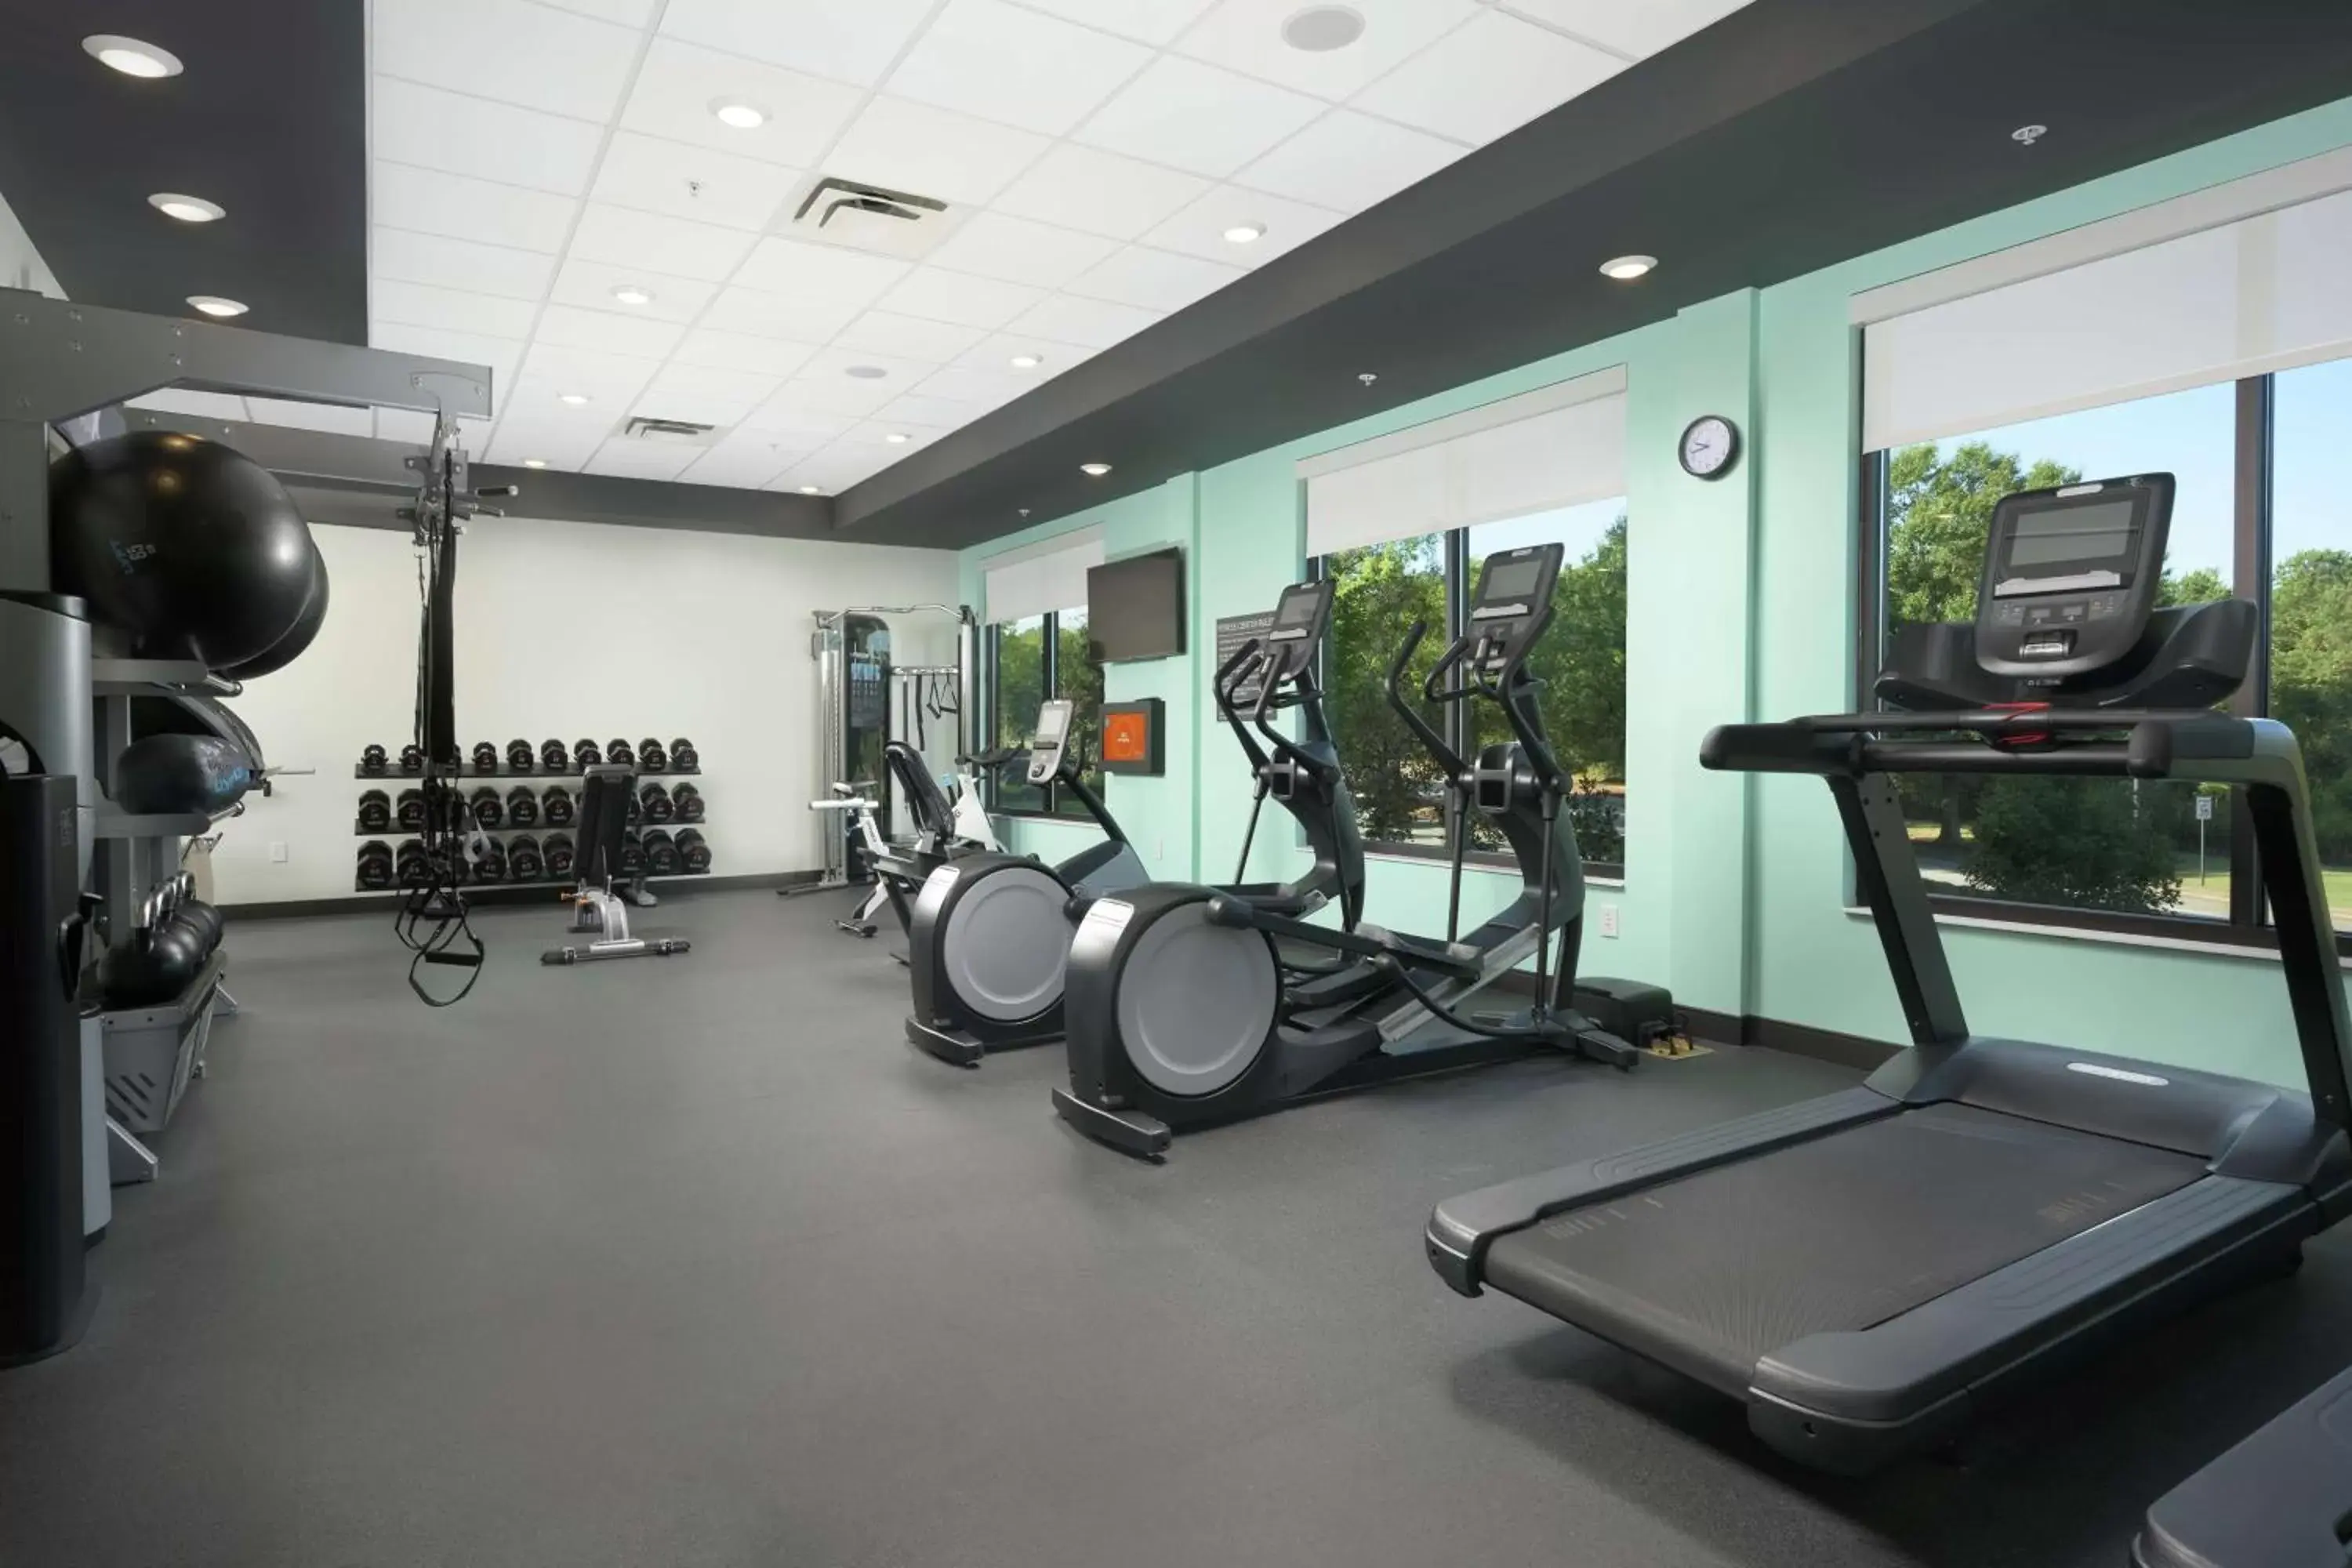 Fitness centre/facilities, Fitness Center/Facilities in Home2 Suites By Hilton Atlanta Nw/Kennesaw, Ga